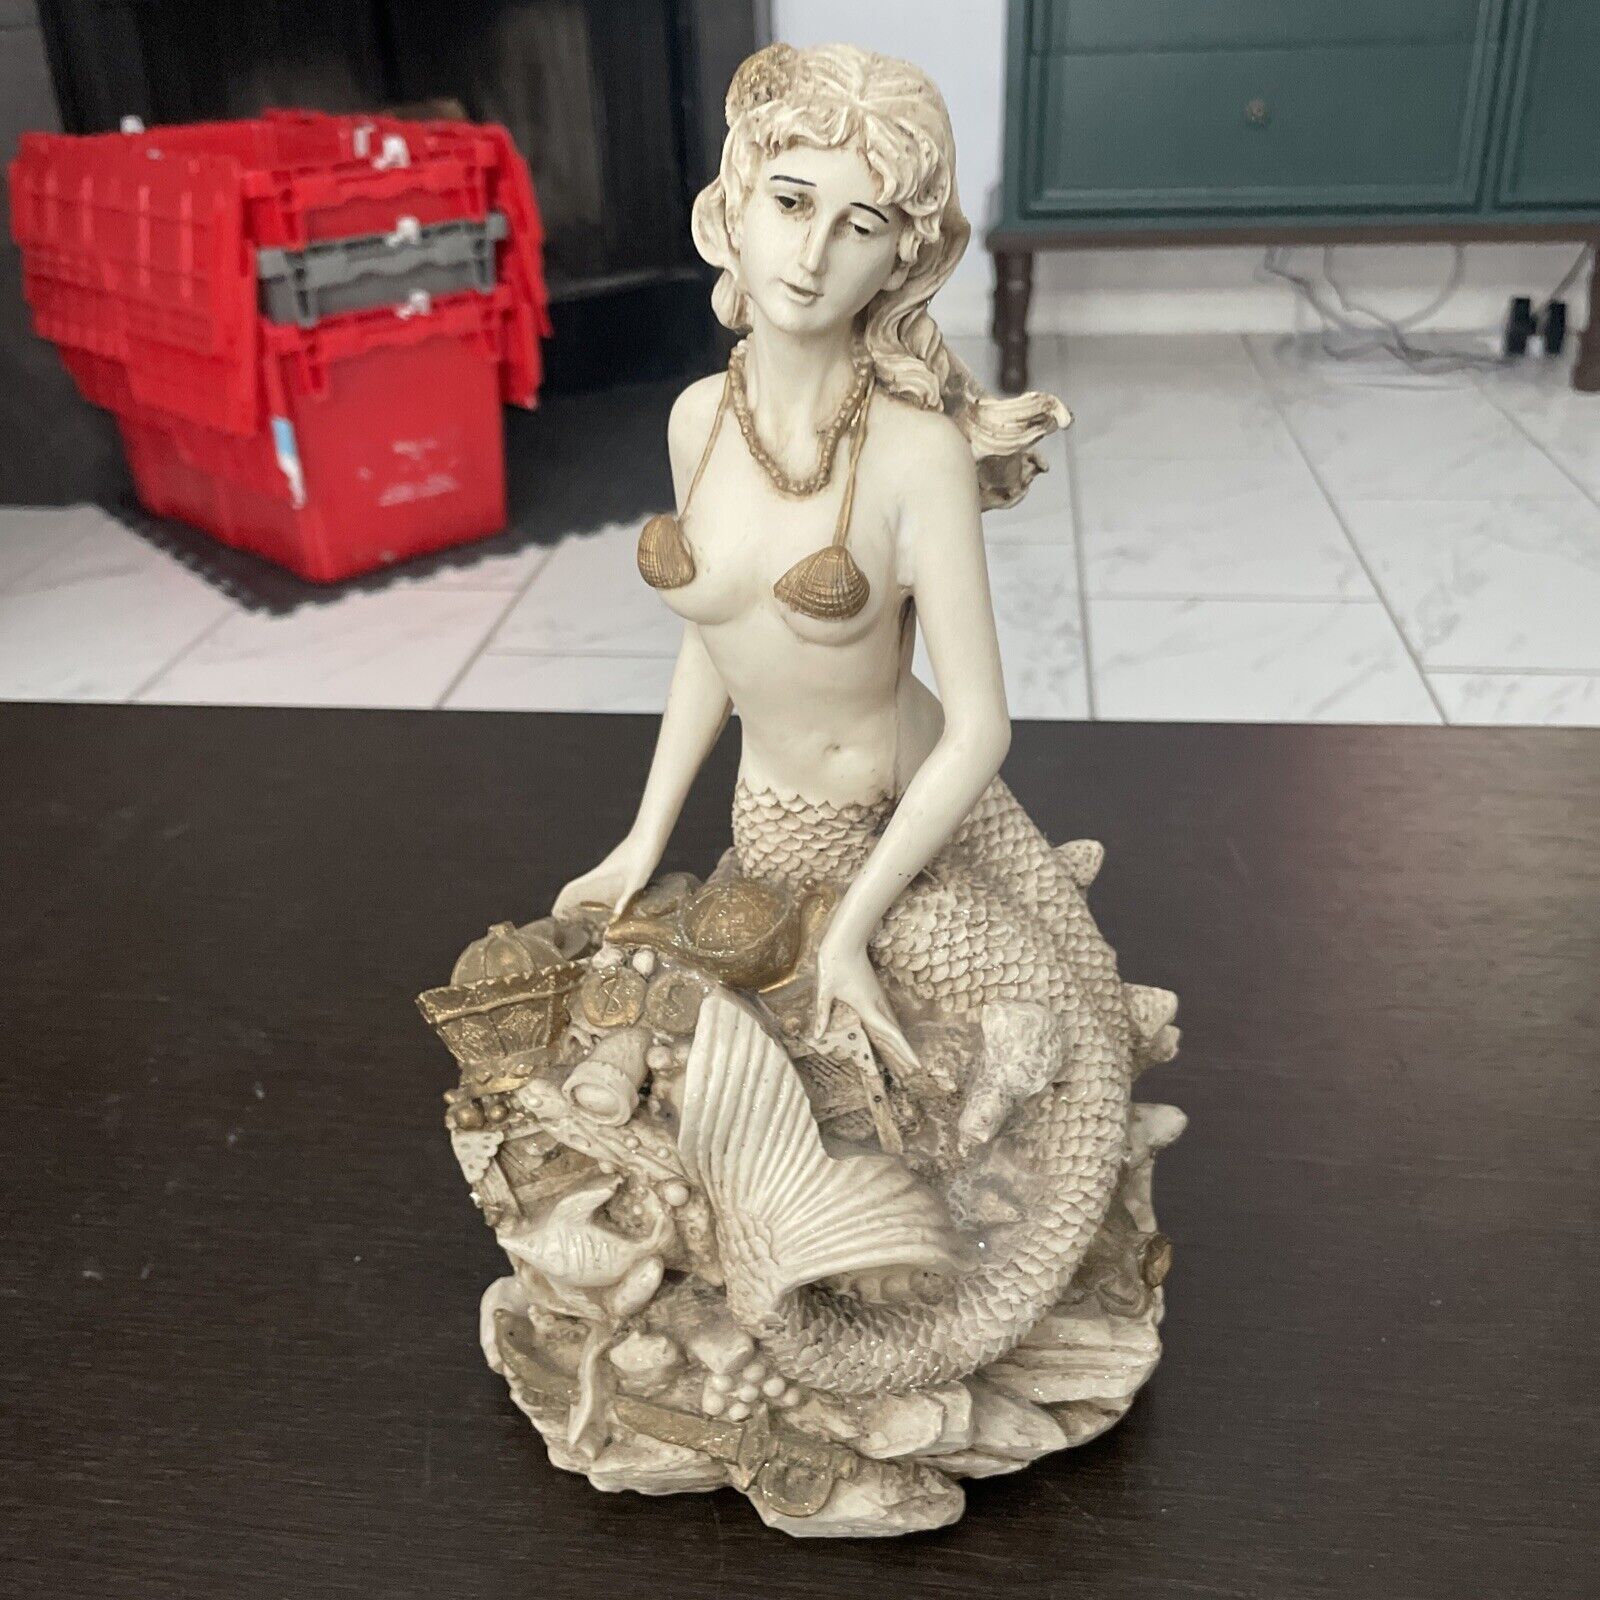 Mermaid Figurine From Cozemel Mexico